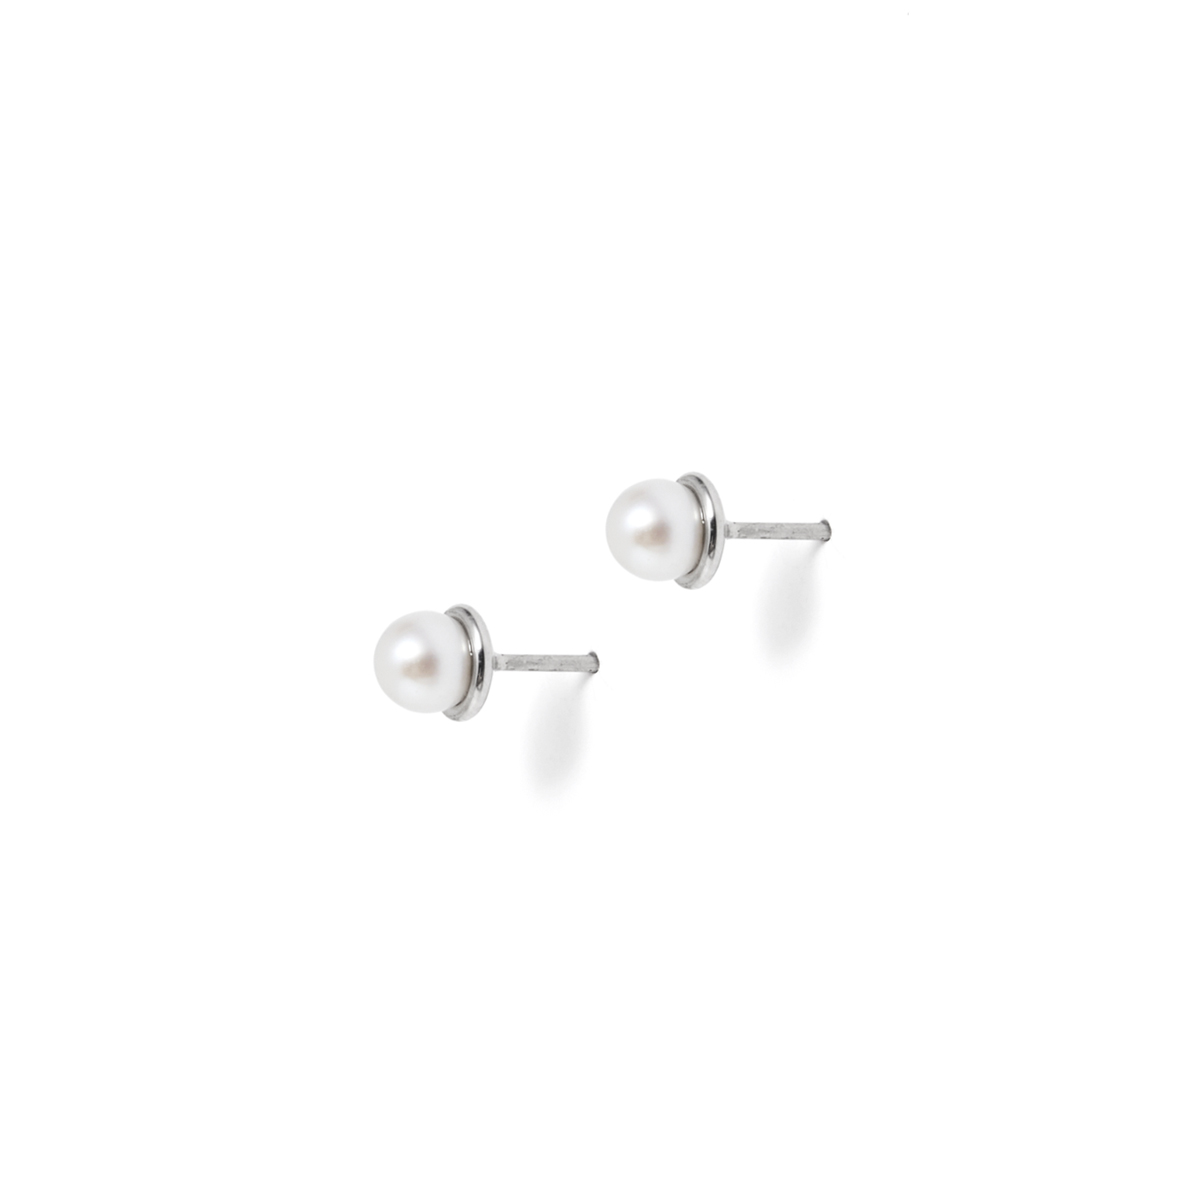 COLD WHITE 4mm PEARL EARRINGS